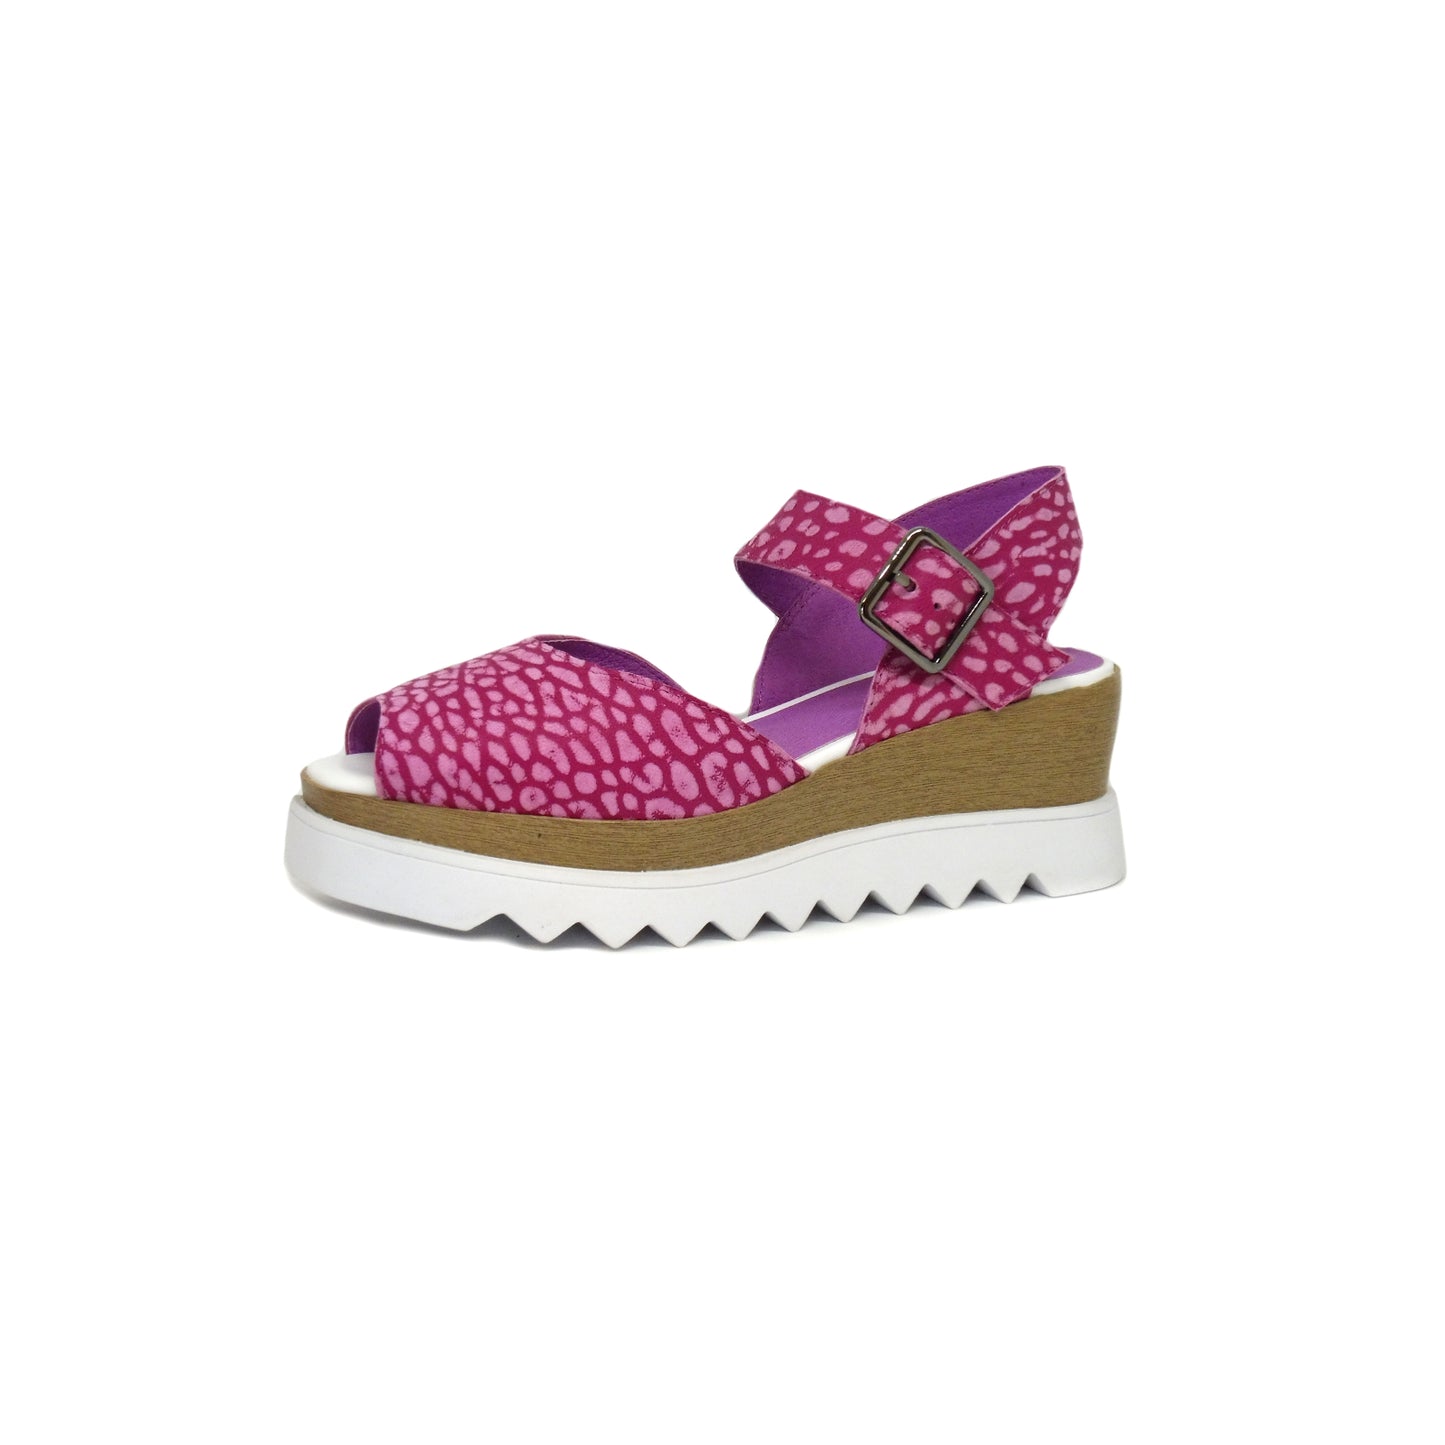 Beverly Hills Cerise Pebble - ONLINE ONLY